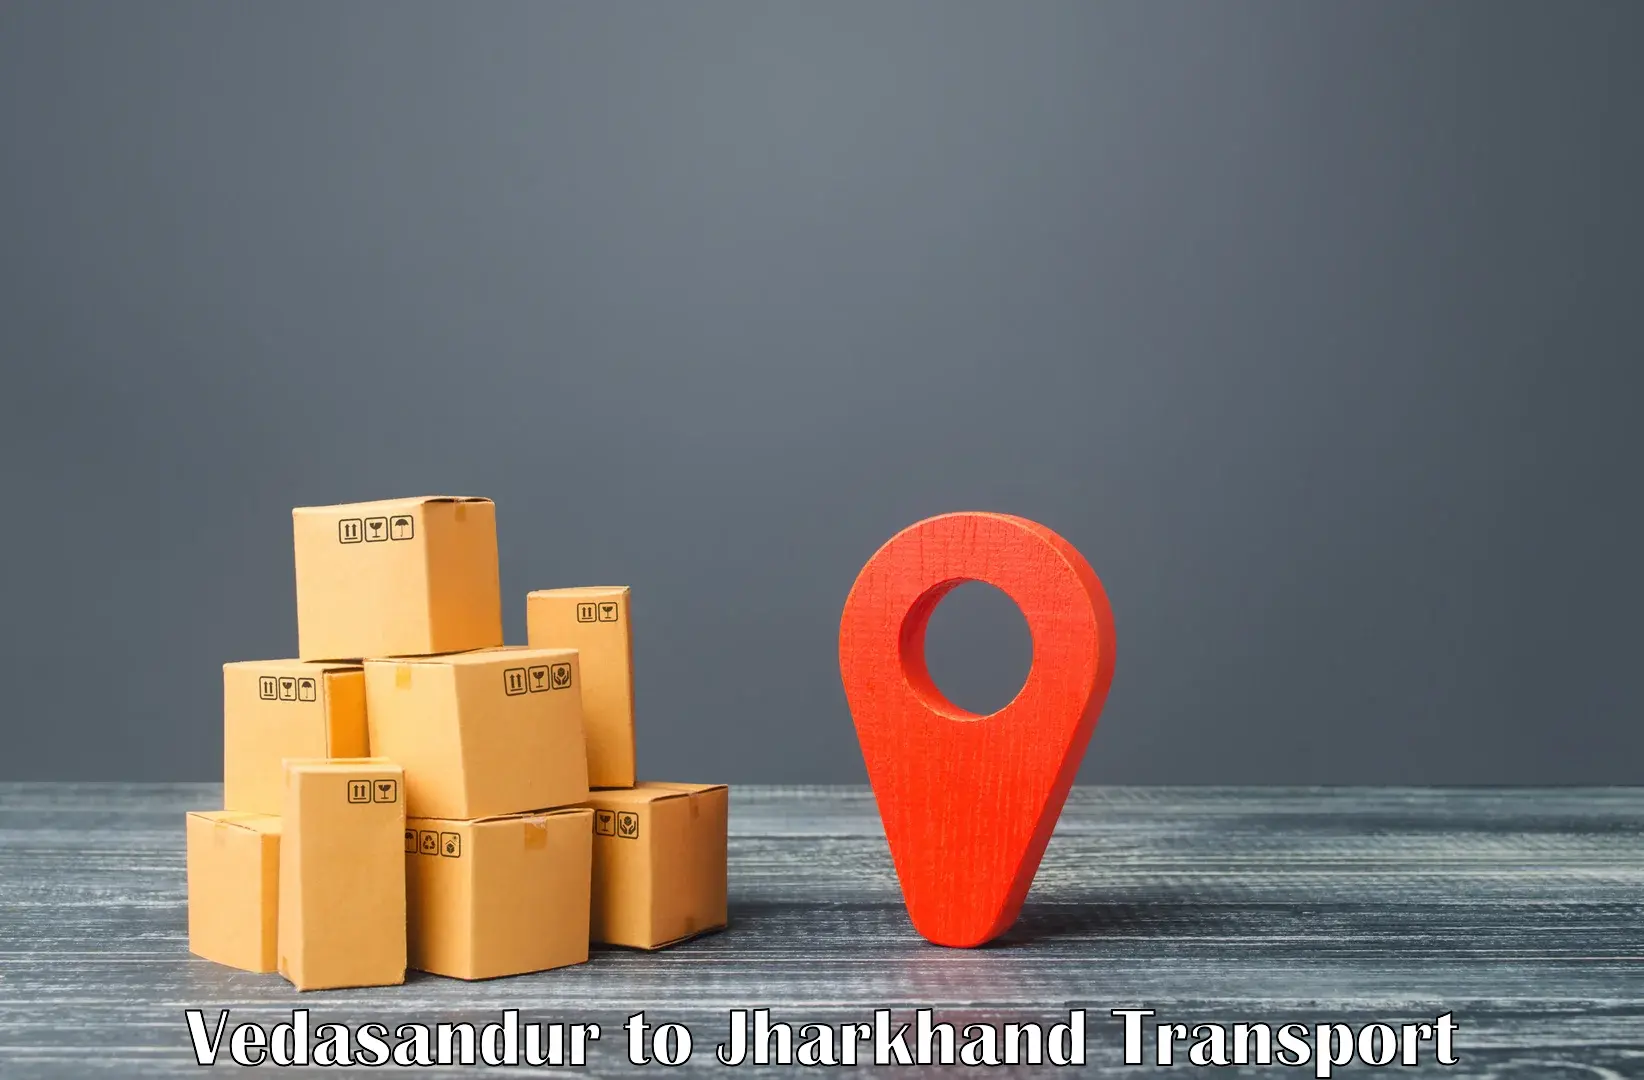 Land transport services in Vedasandur to Ramgarh